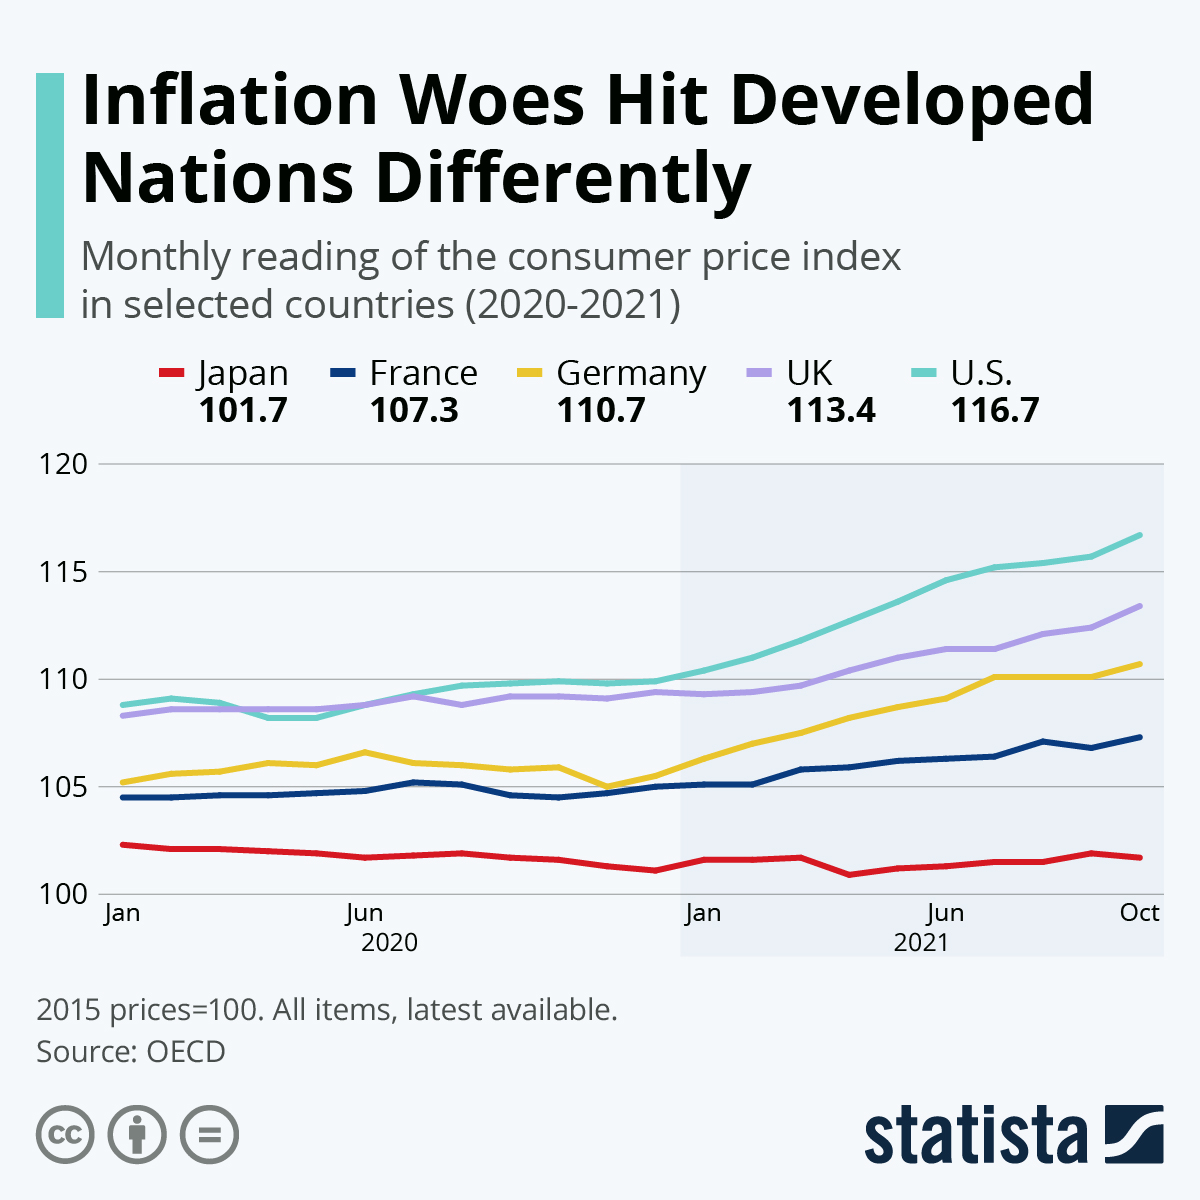 Inflation Woes Hit Developed Nations Differently
